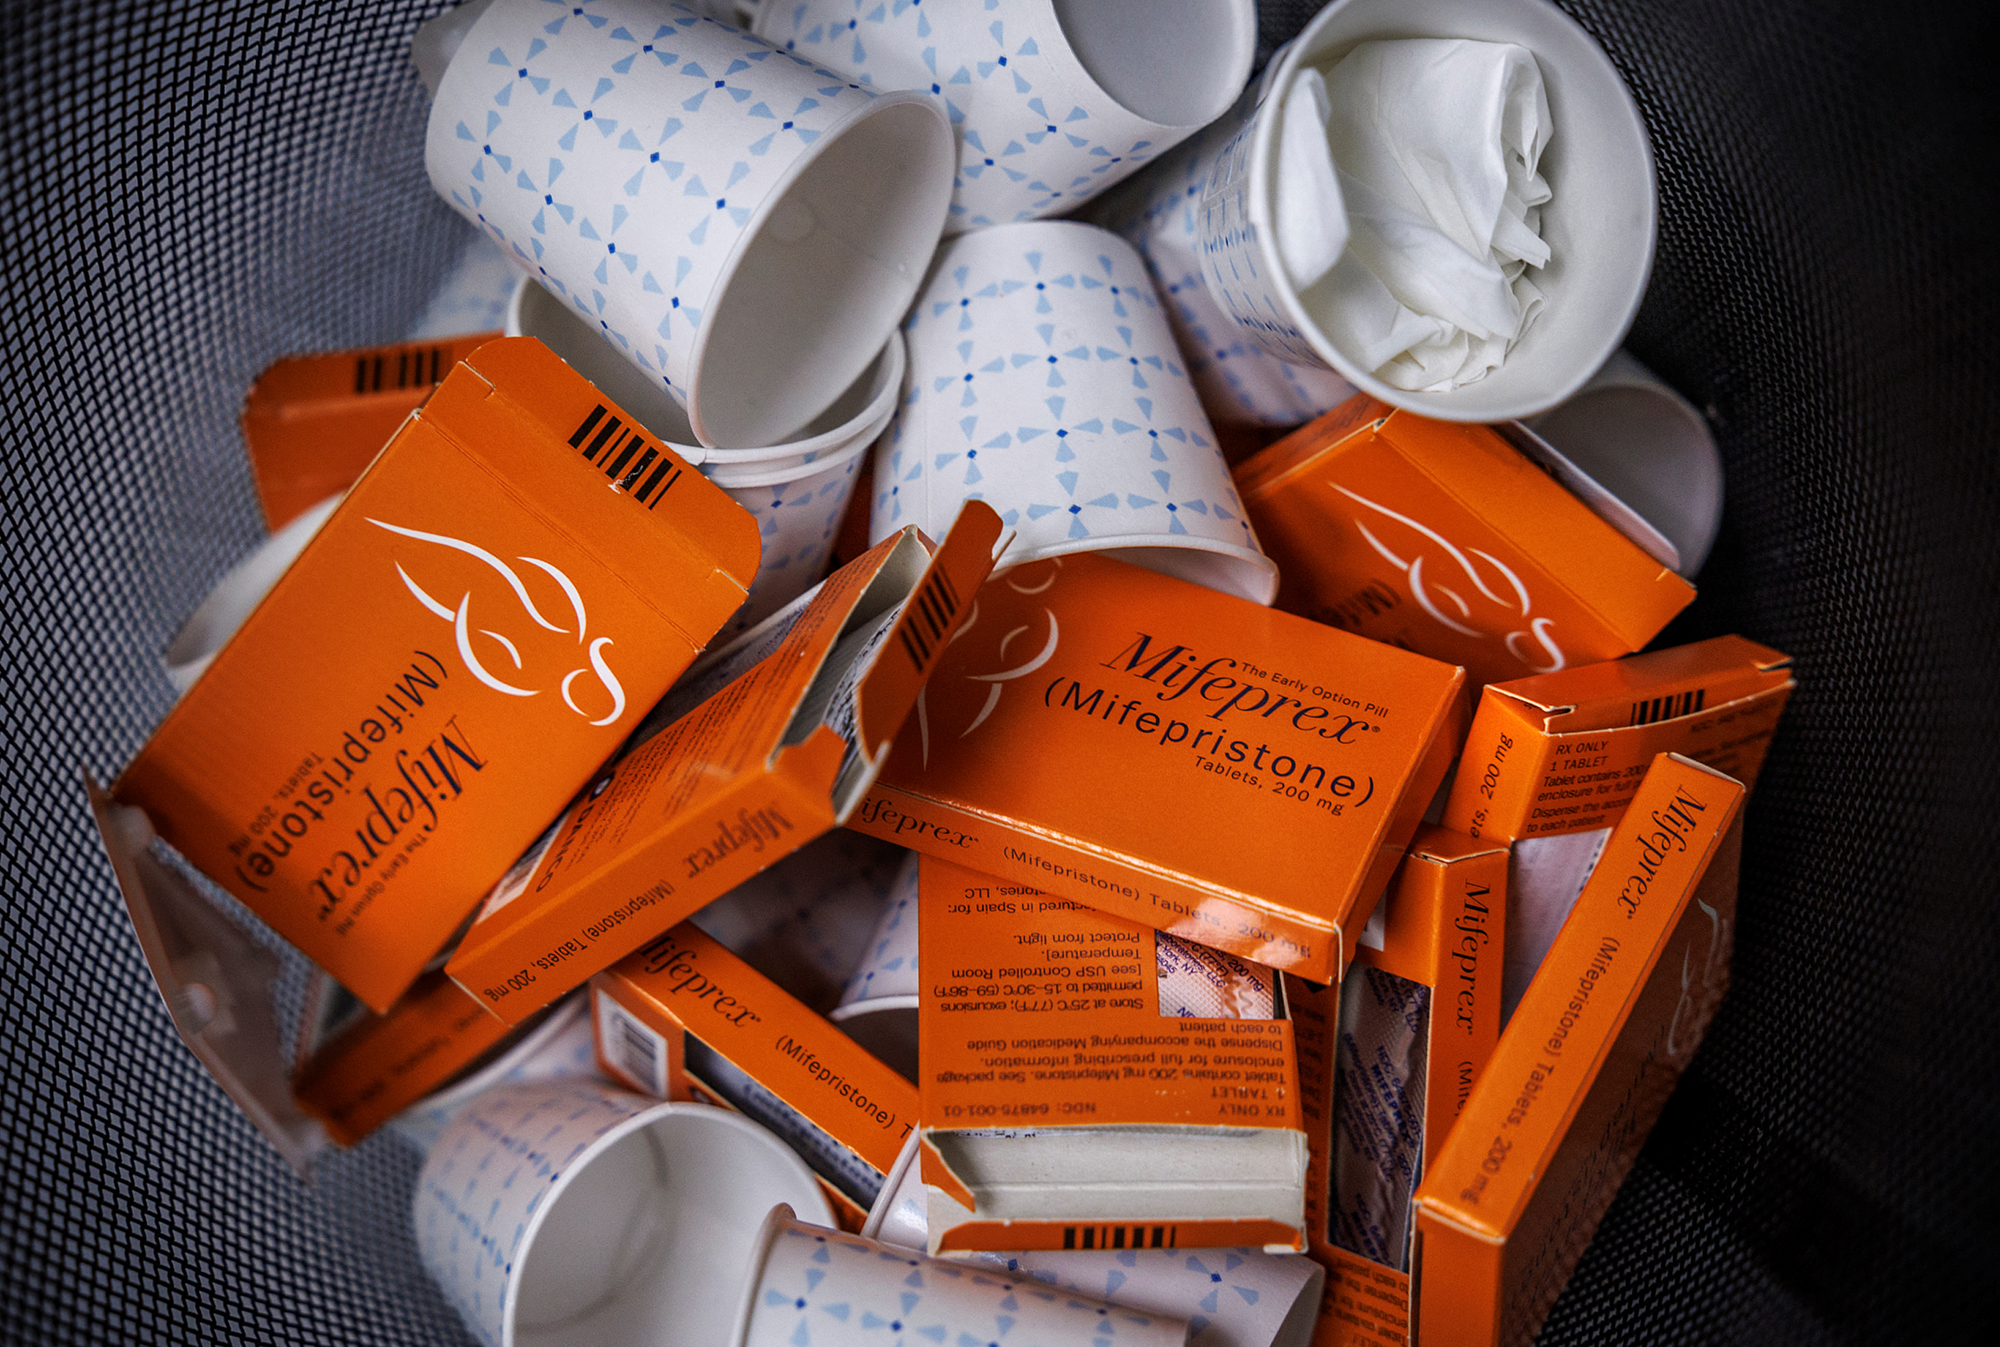 Used boxes of Mifepristone pills, the first drug used in a medical abortion, fill a trash at Alamo Women's Clinic in Albuquerque, New Mexico on January 11.